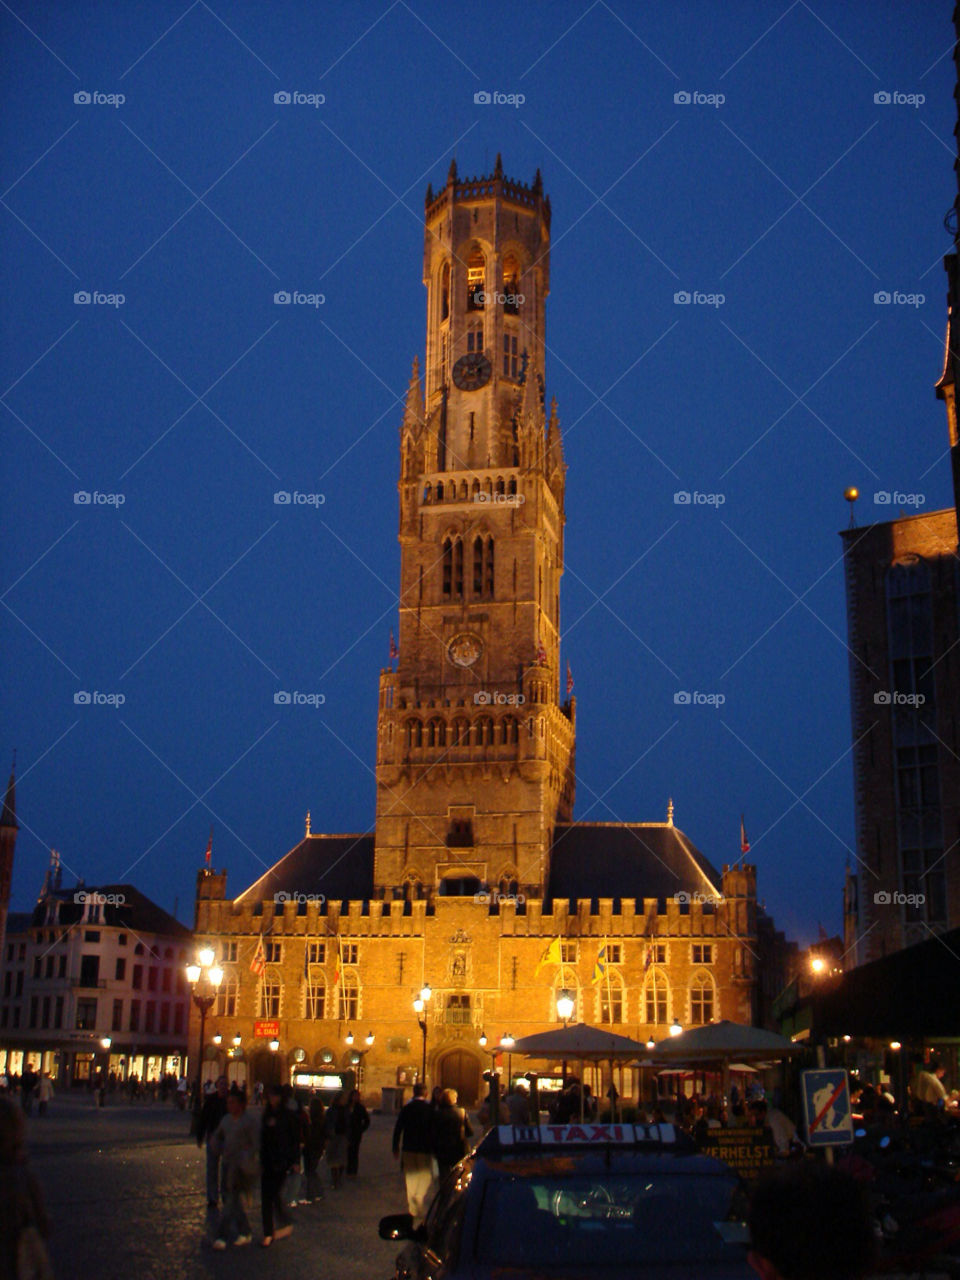 clock tower belgium marketplace by riverracer